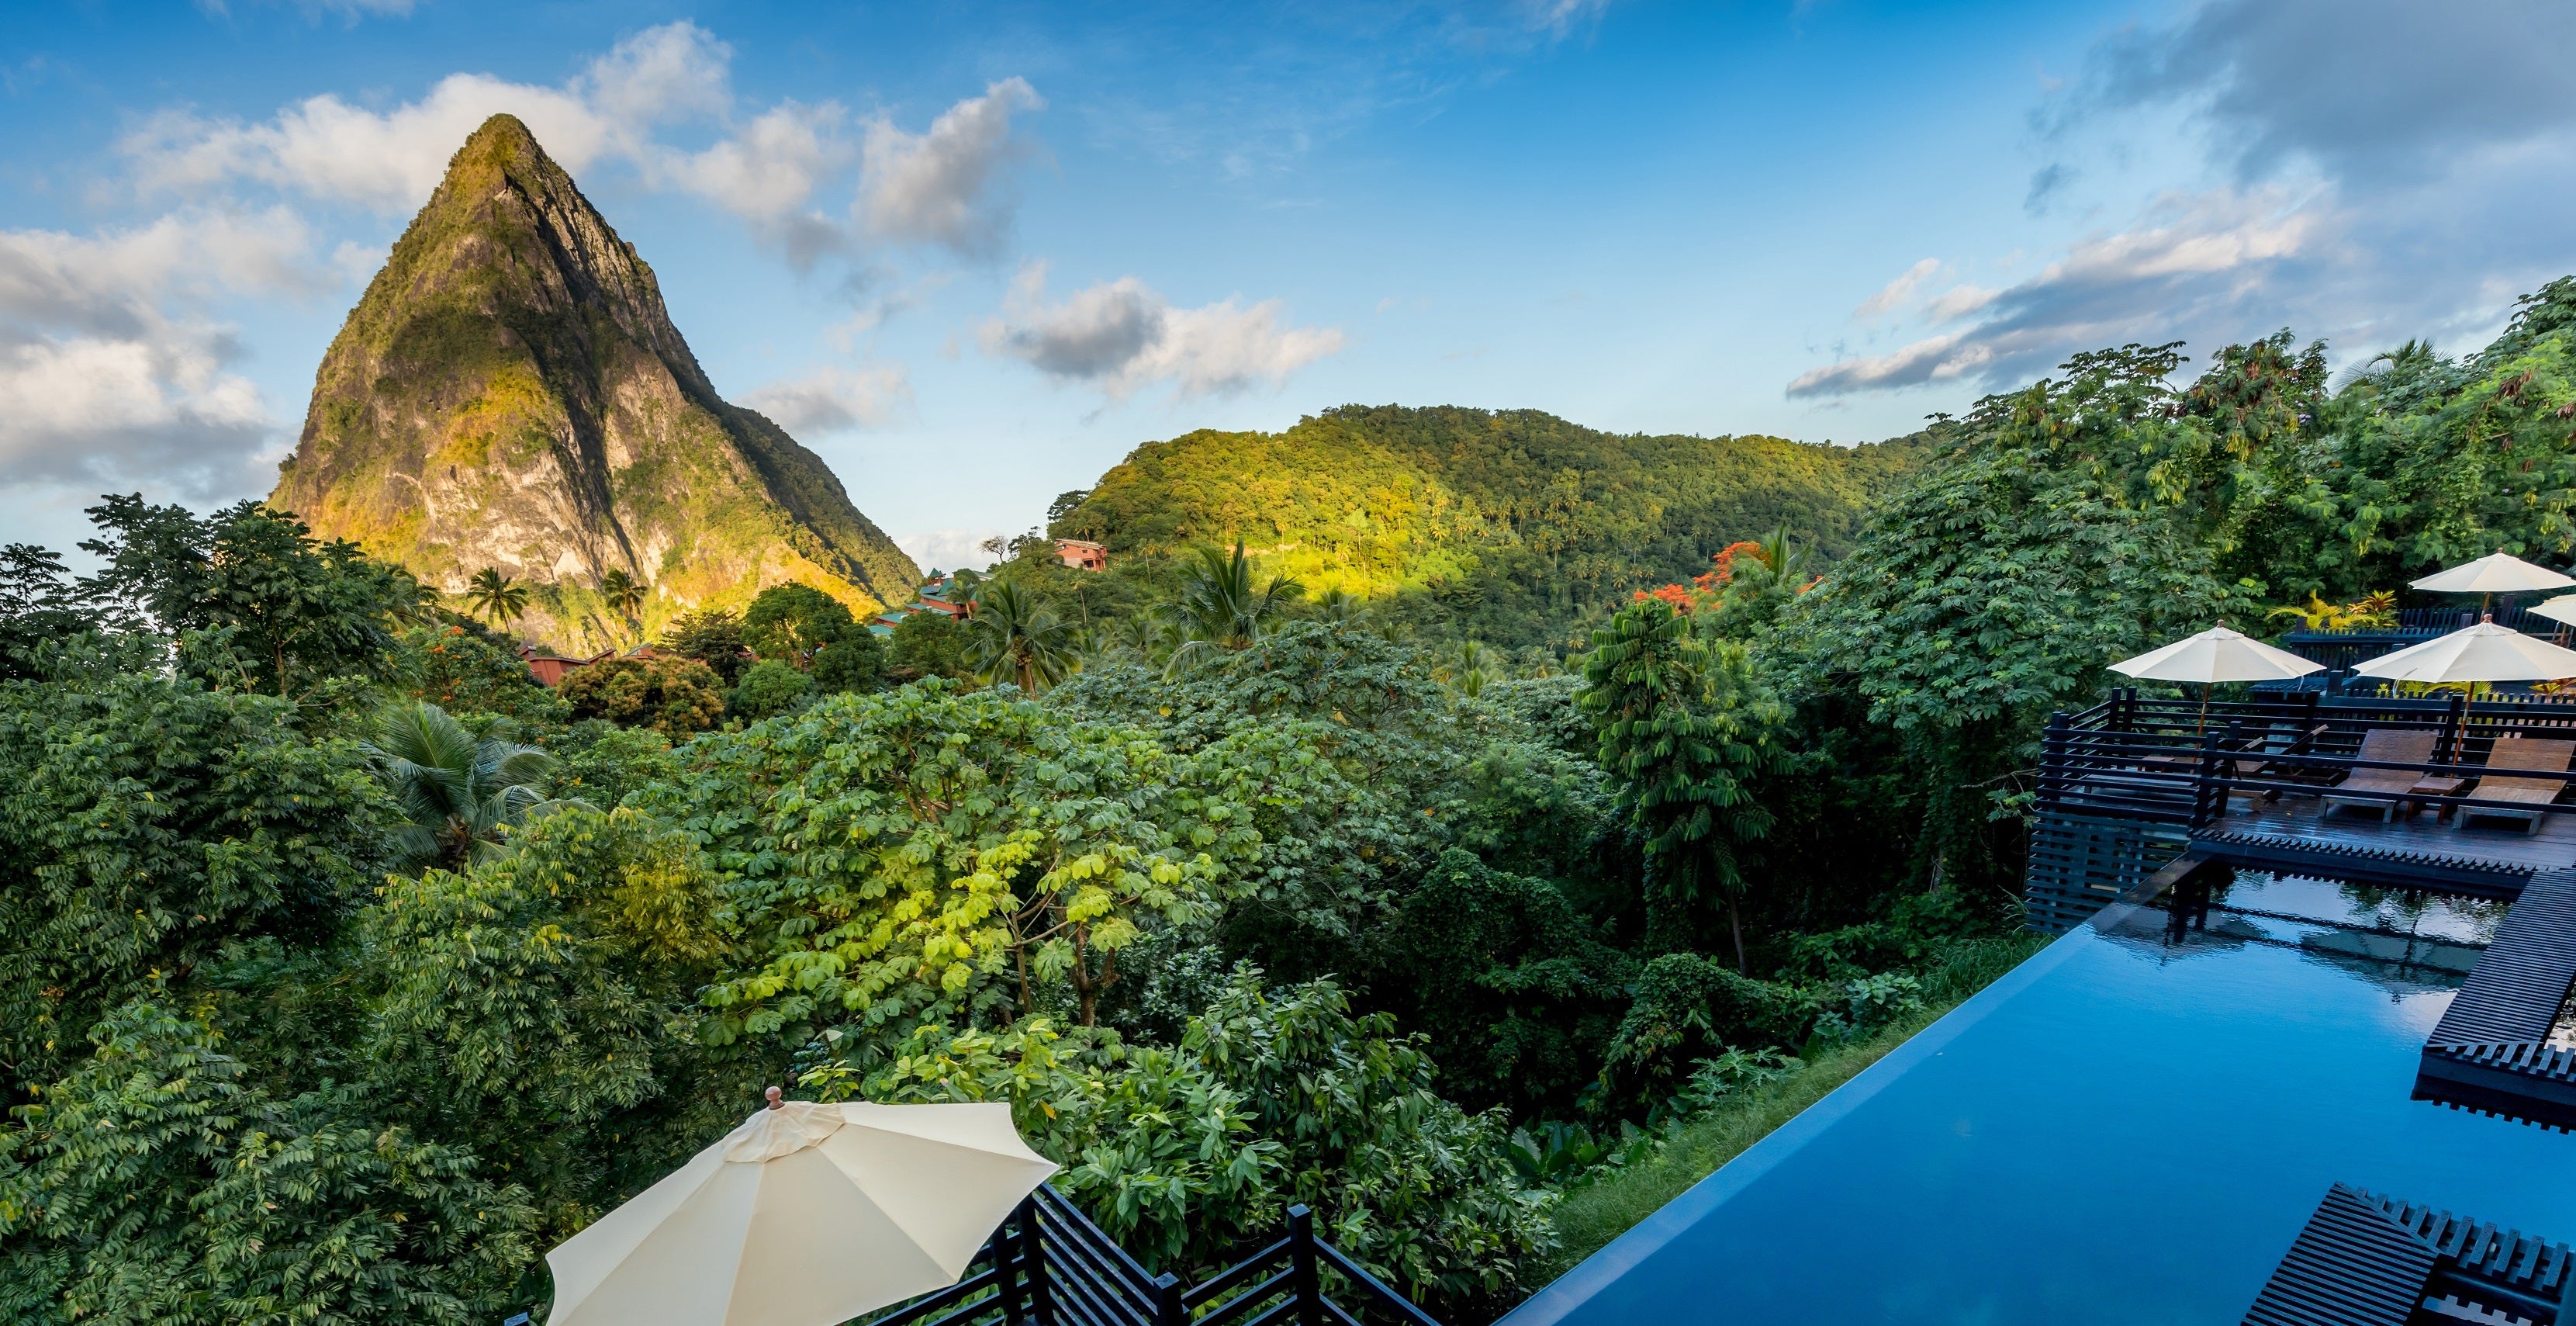 Saint Lucia Piton View from Hotel Chocolat Hotel